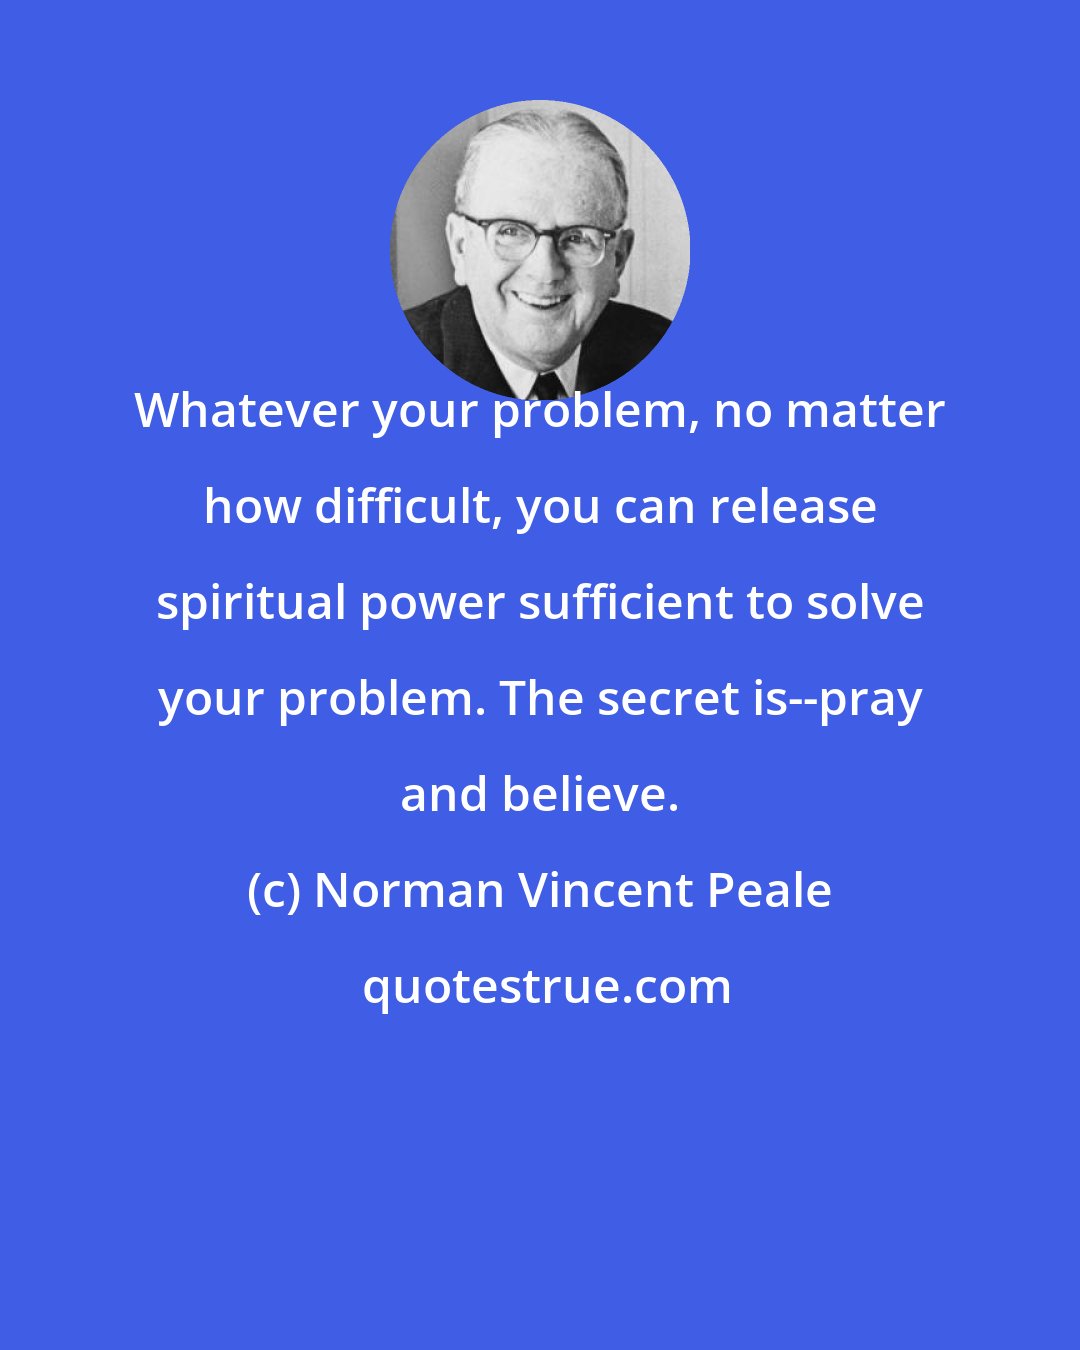 Norman Vincent Peale: Whatever your problem, no matter how difficult, you can release spiritual power sufficient to solve your problem. The secret is--pray and believe.